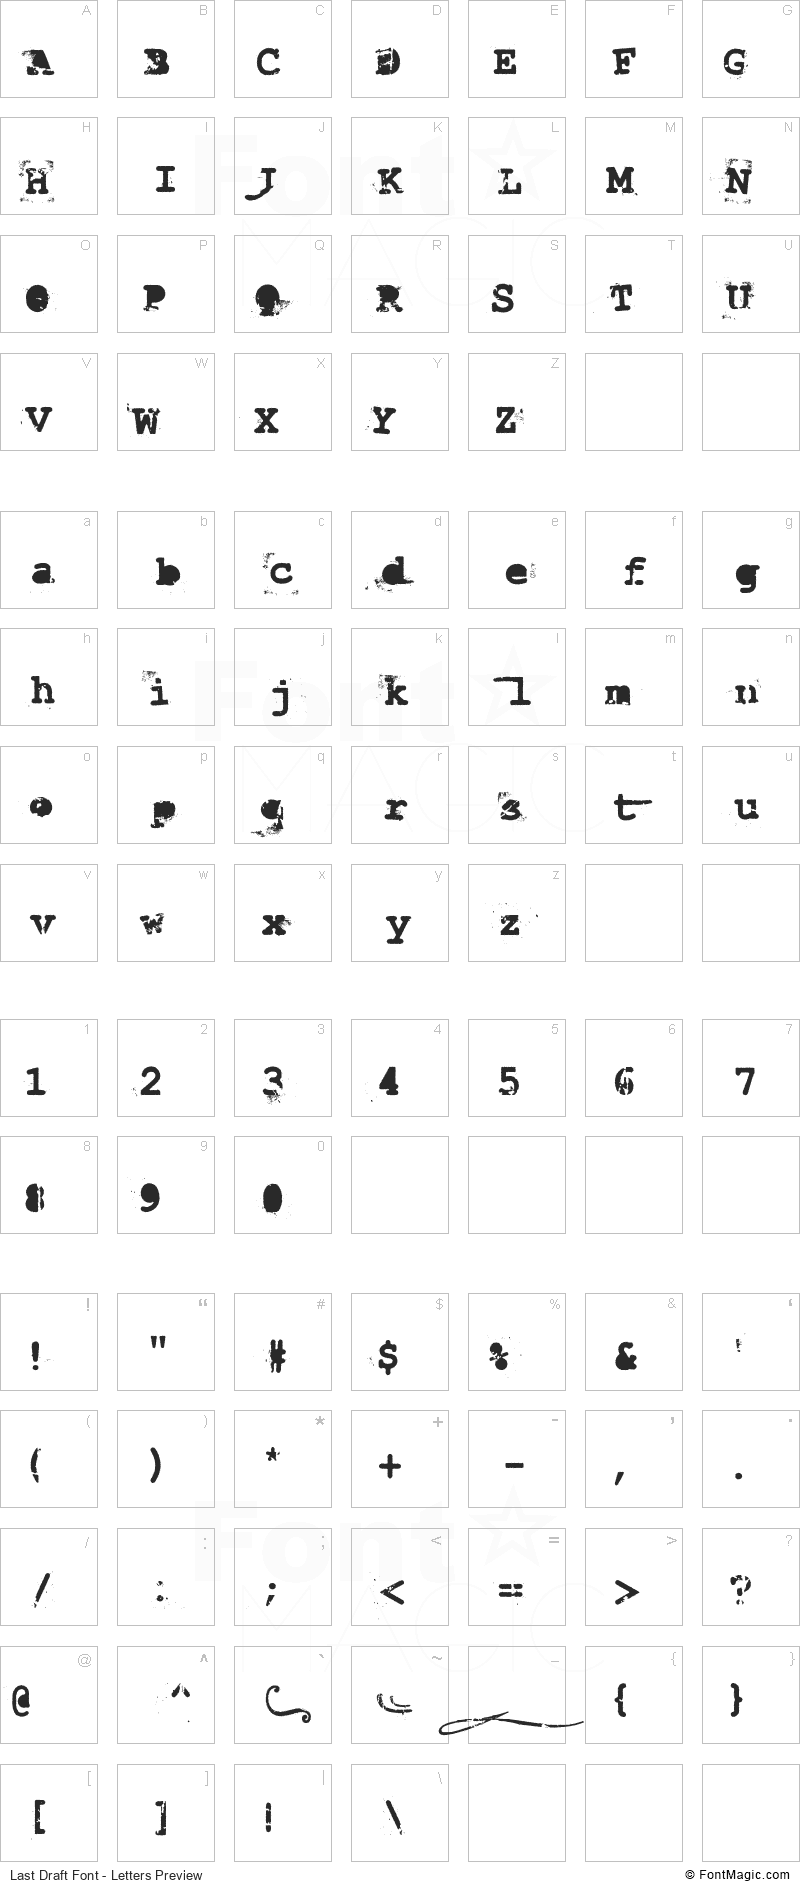 Last Draft Font - All Latters Preview Chart